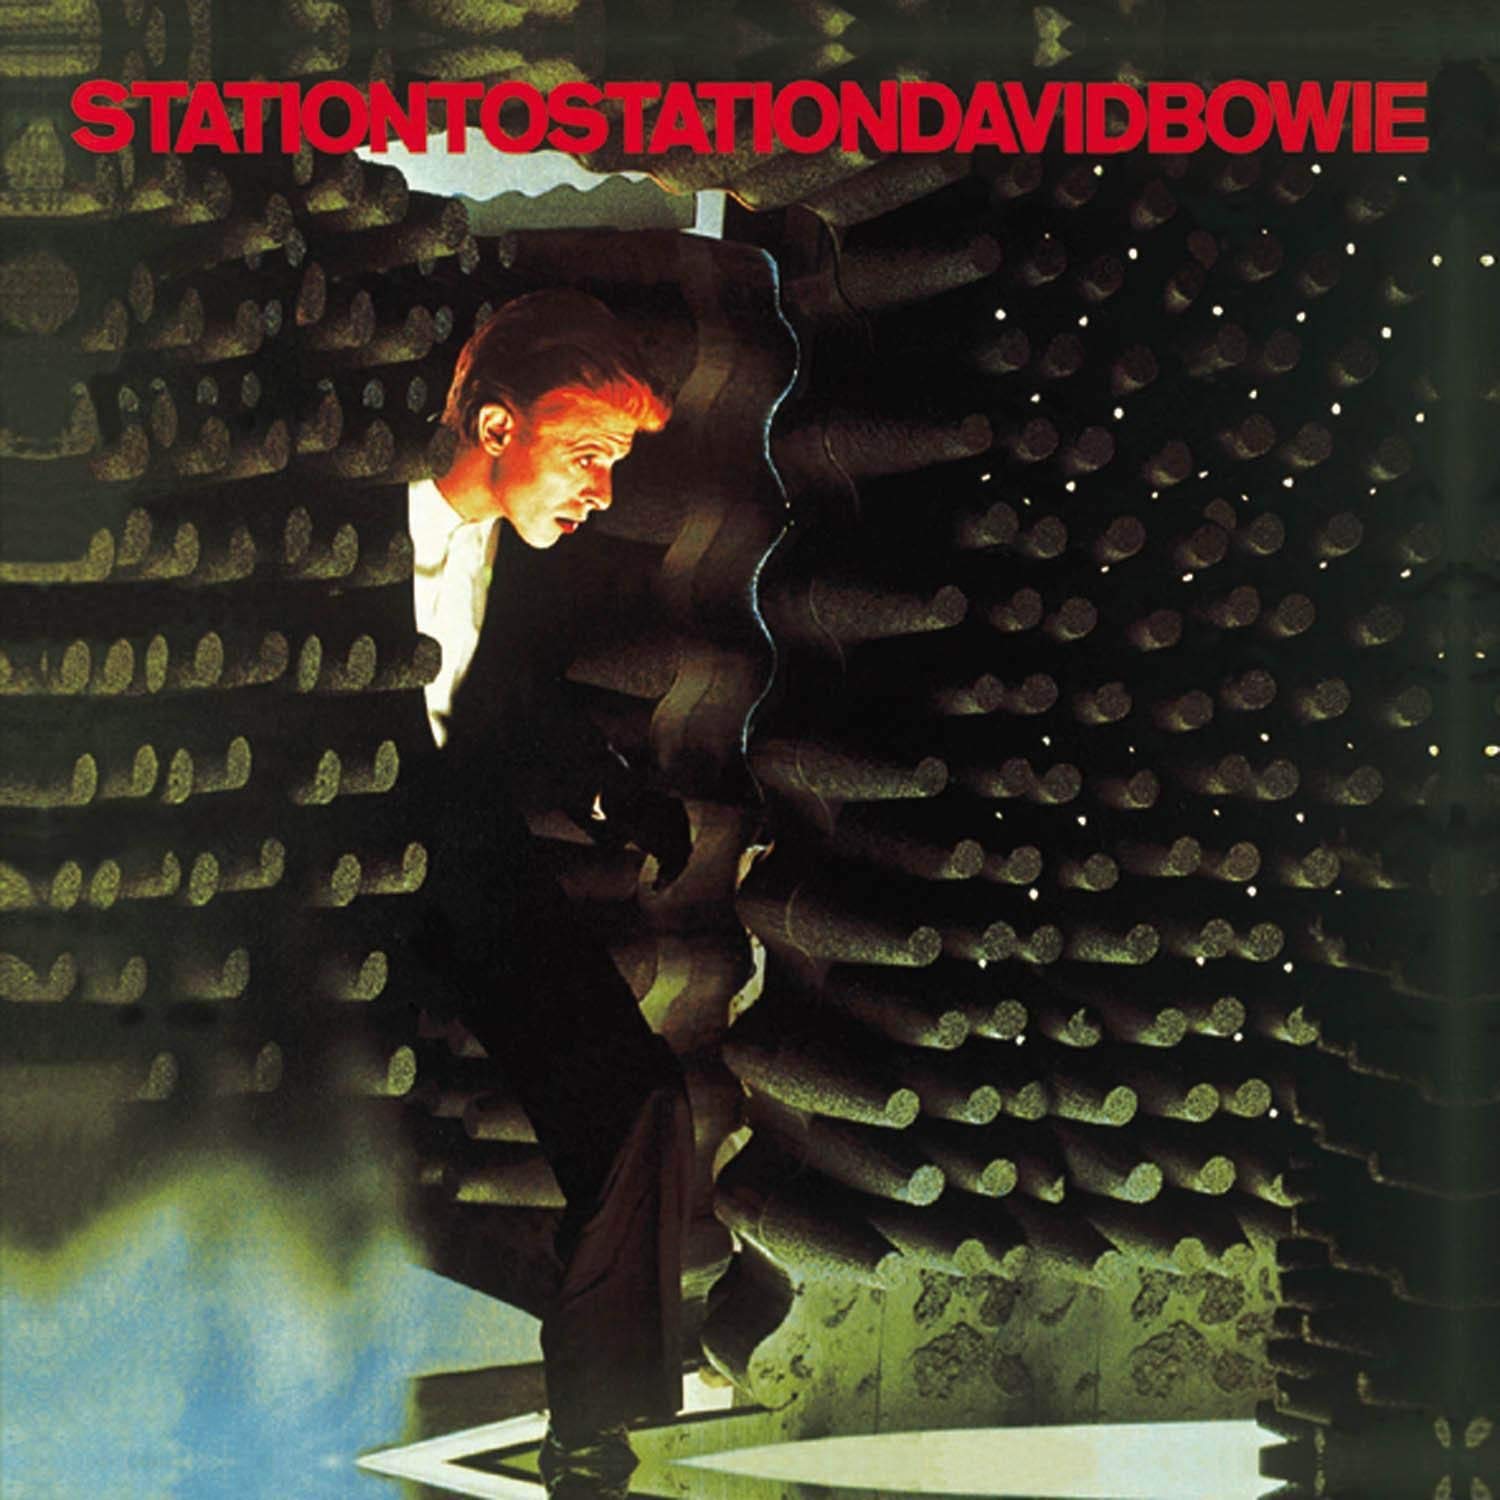 David Bowie - Station To Station - Saint Marie Records